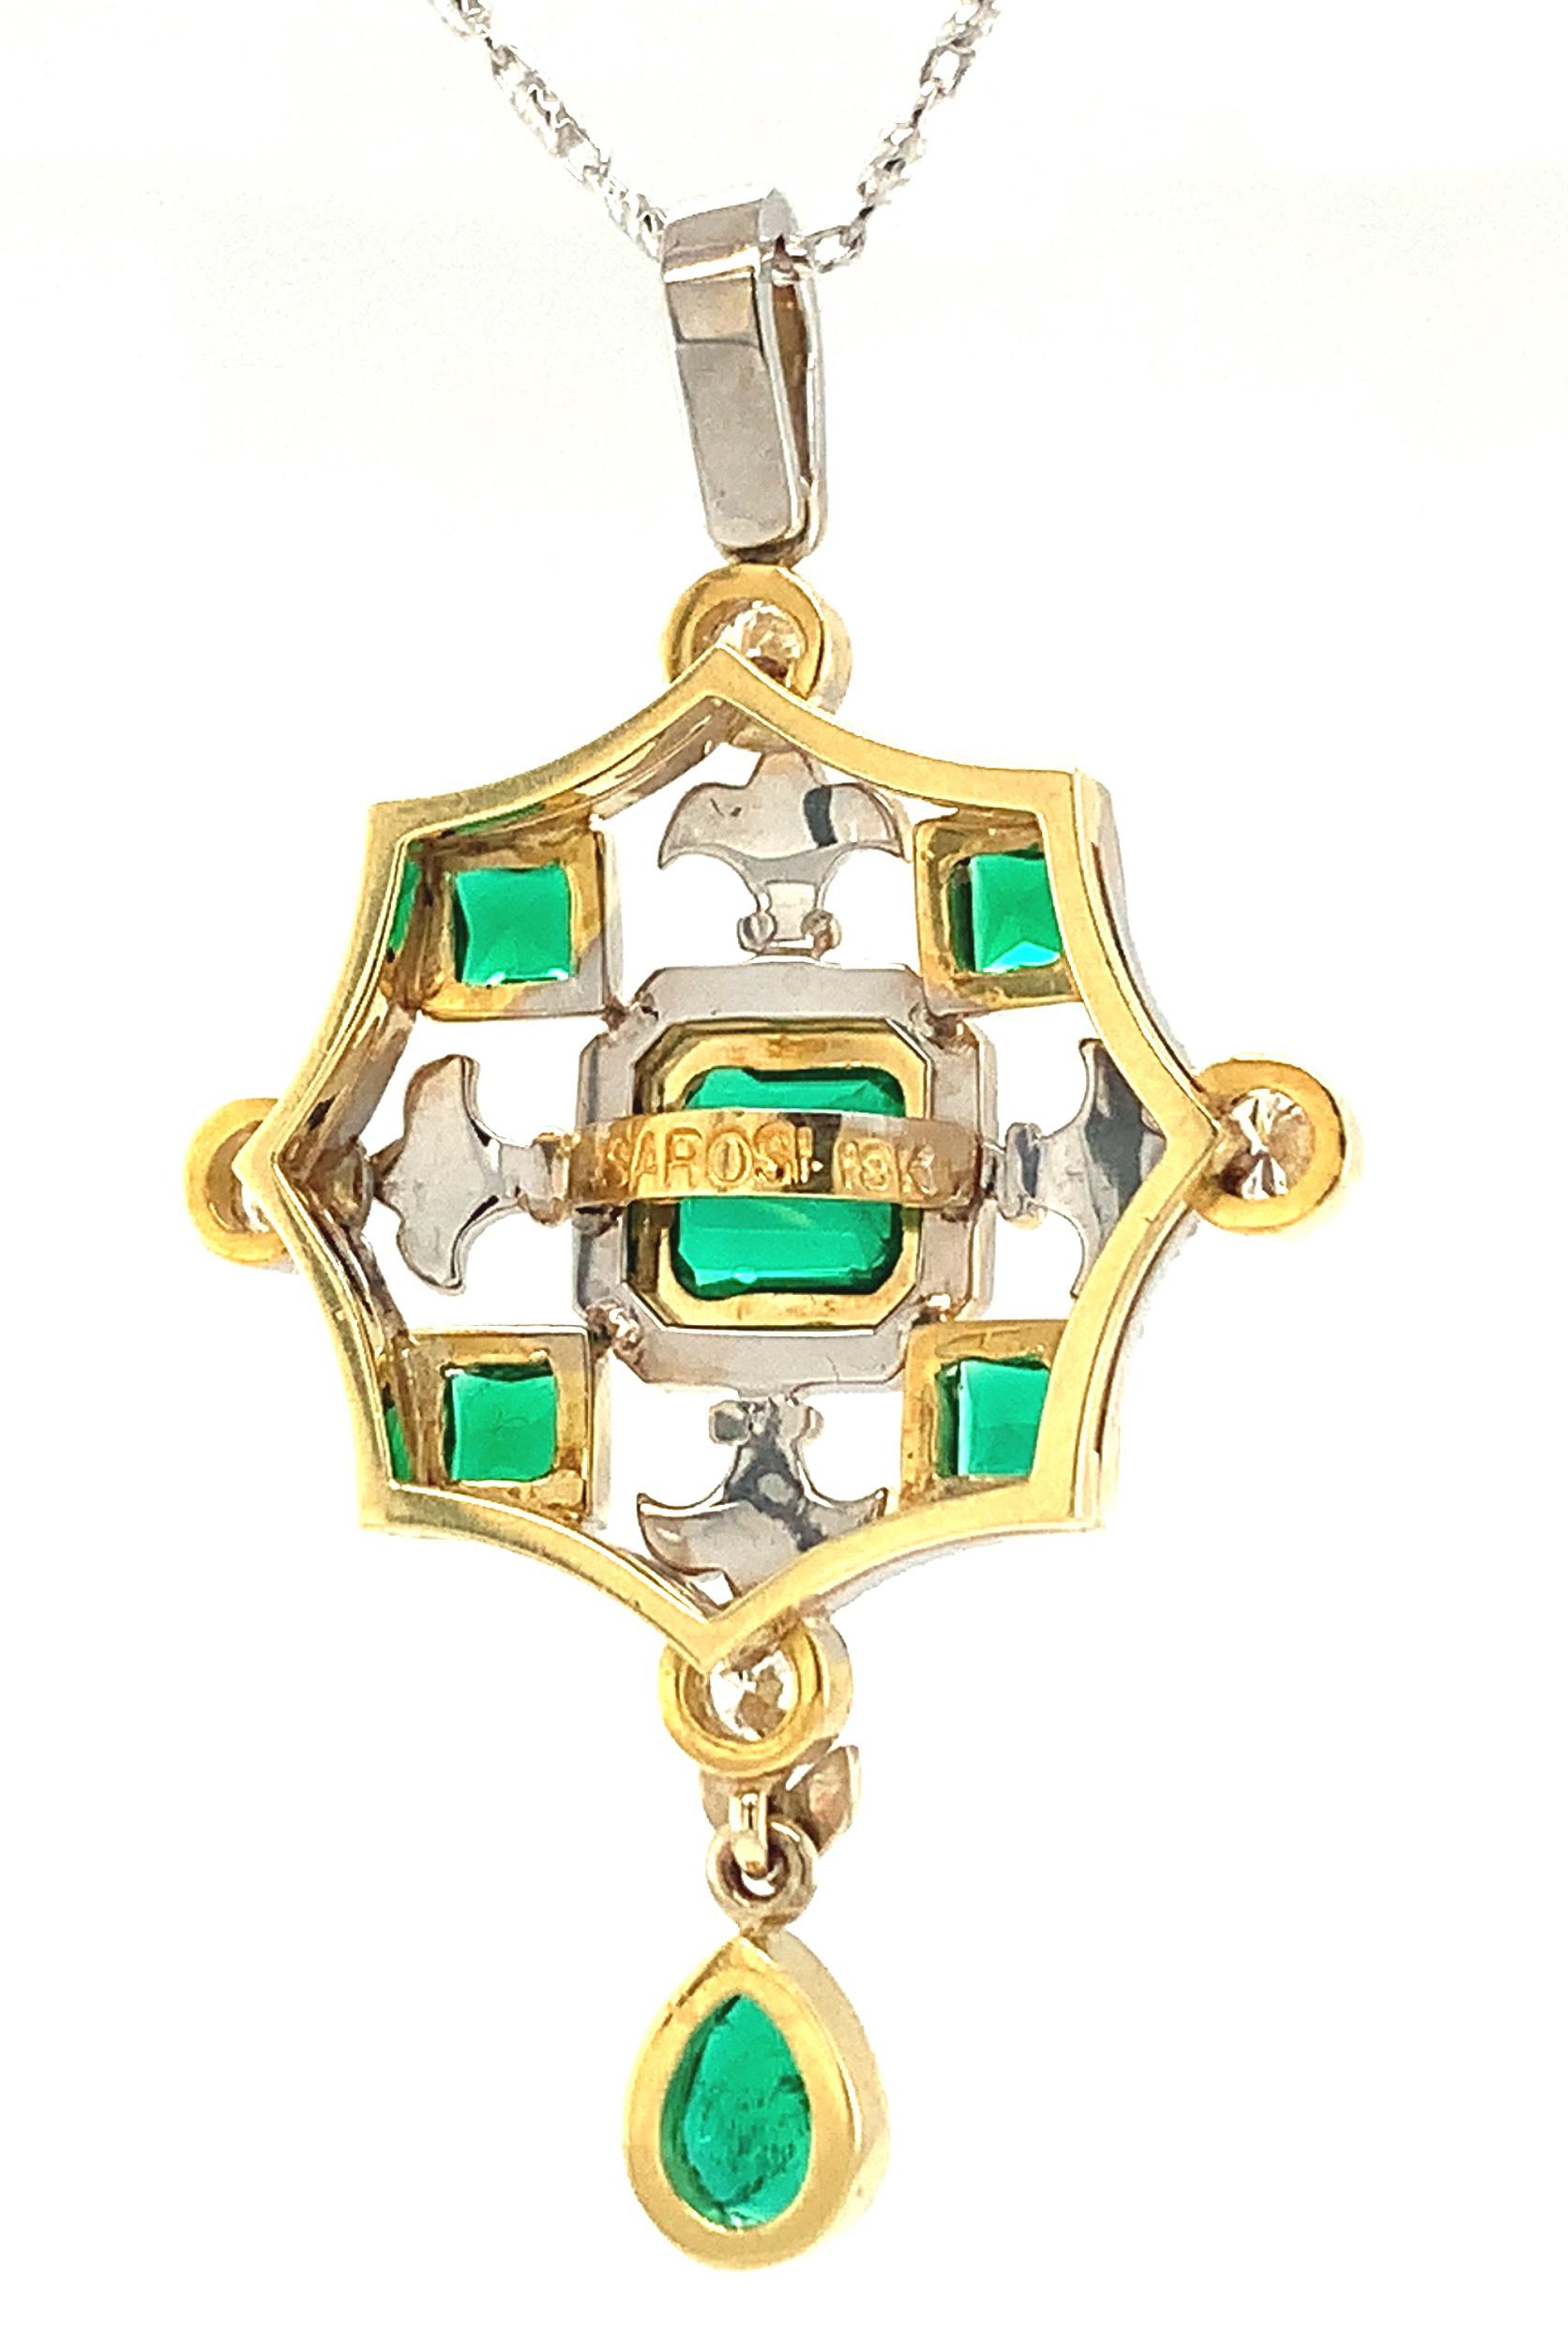 Emerald Cut Emerald and Diamond Renaissance Inspired Necklace in 18k White and Yellow Gold For Sale